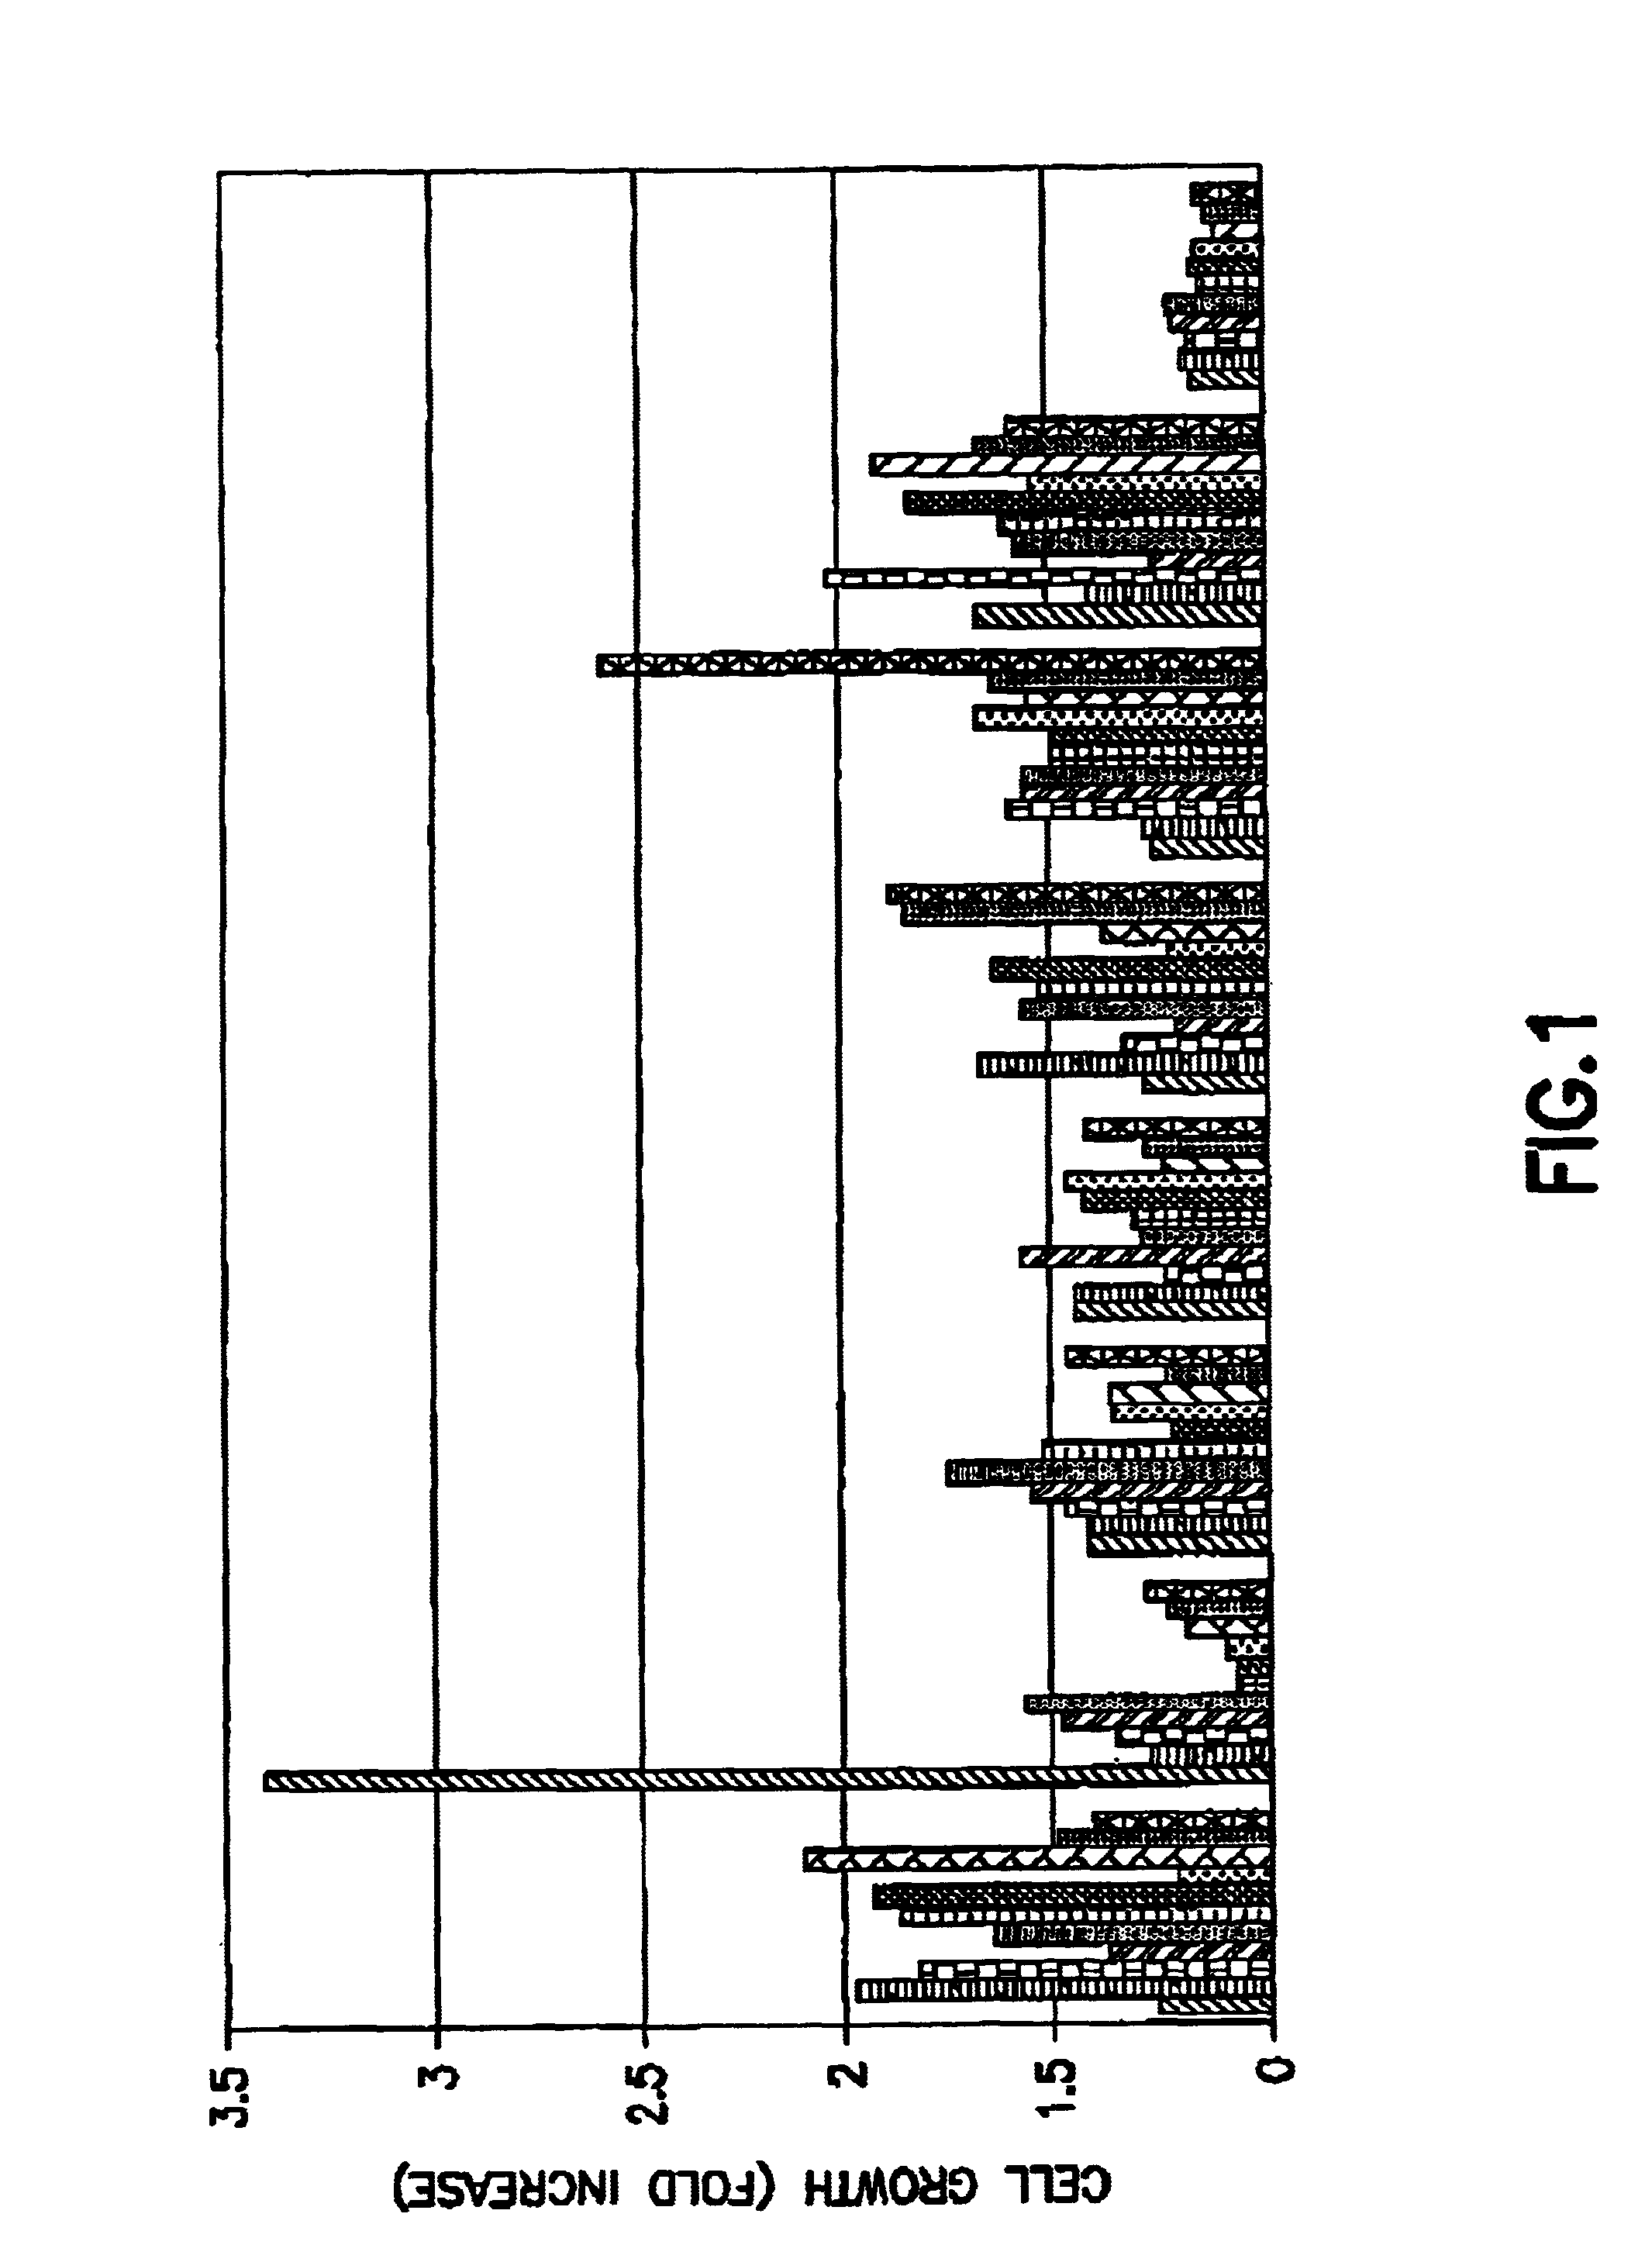 Method for determining the presence or absence of respiring cells on a three-dimensional scaffold